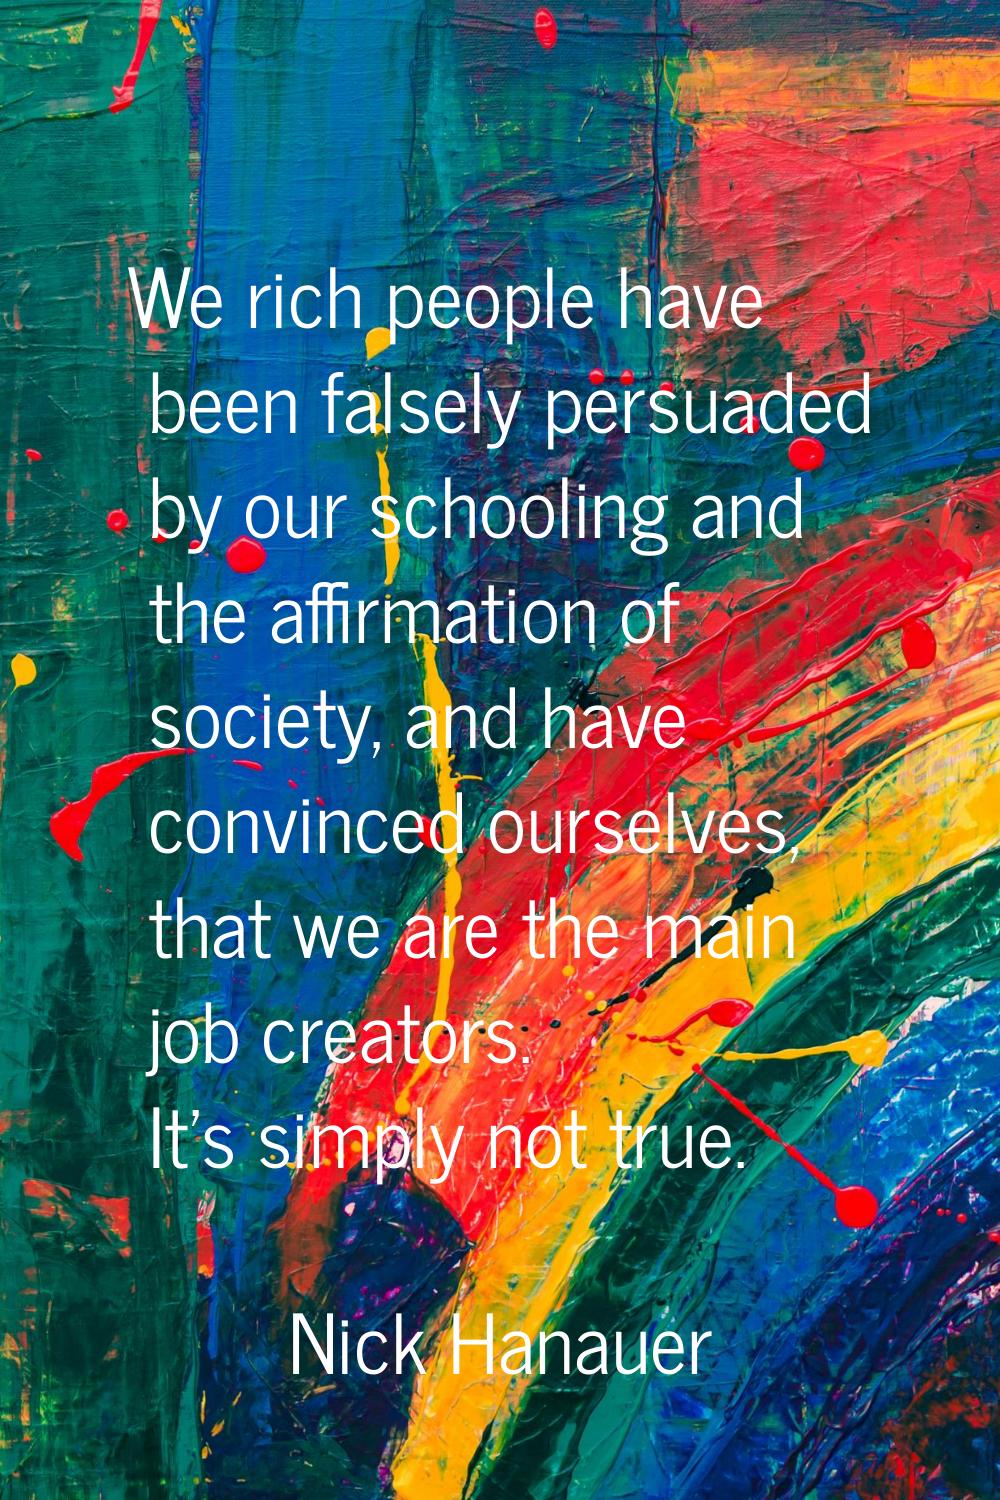 We rich people have been falsely persuaded by our schooling and the affirmation of society, and hav